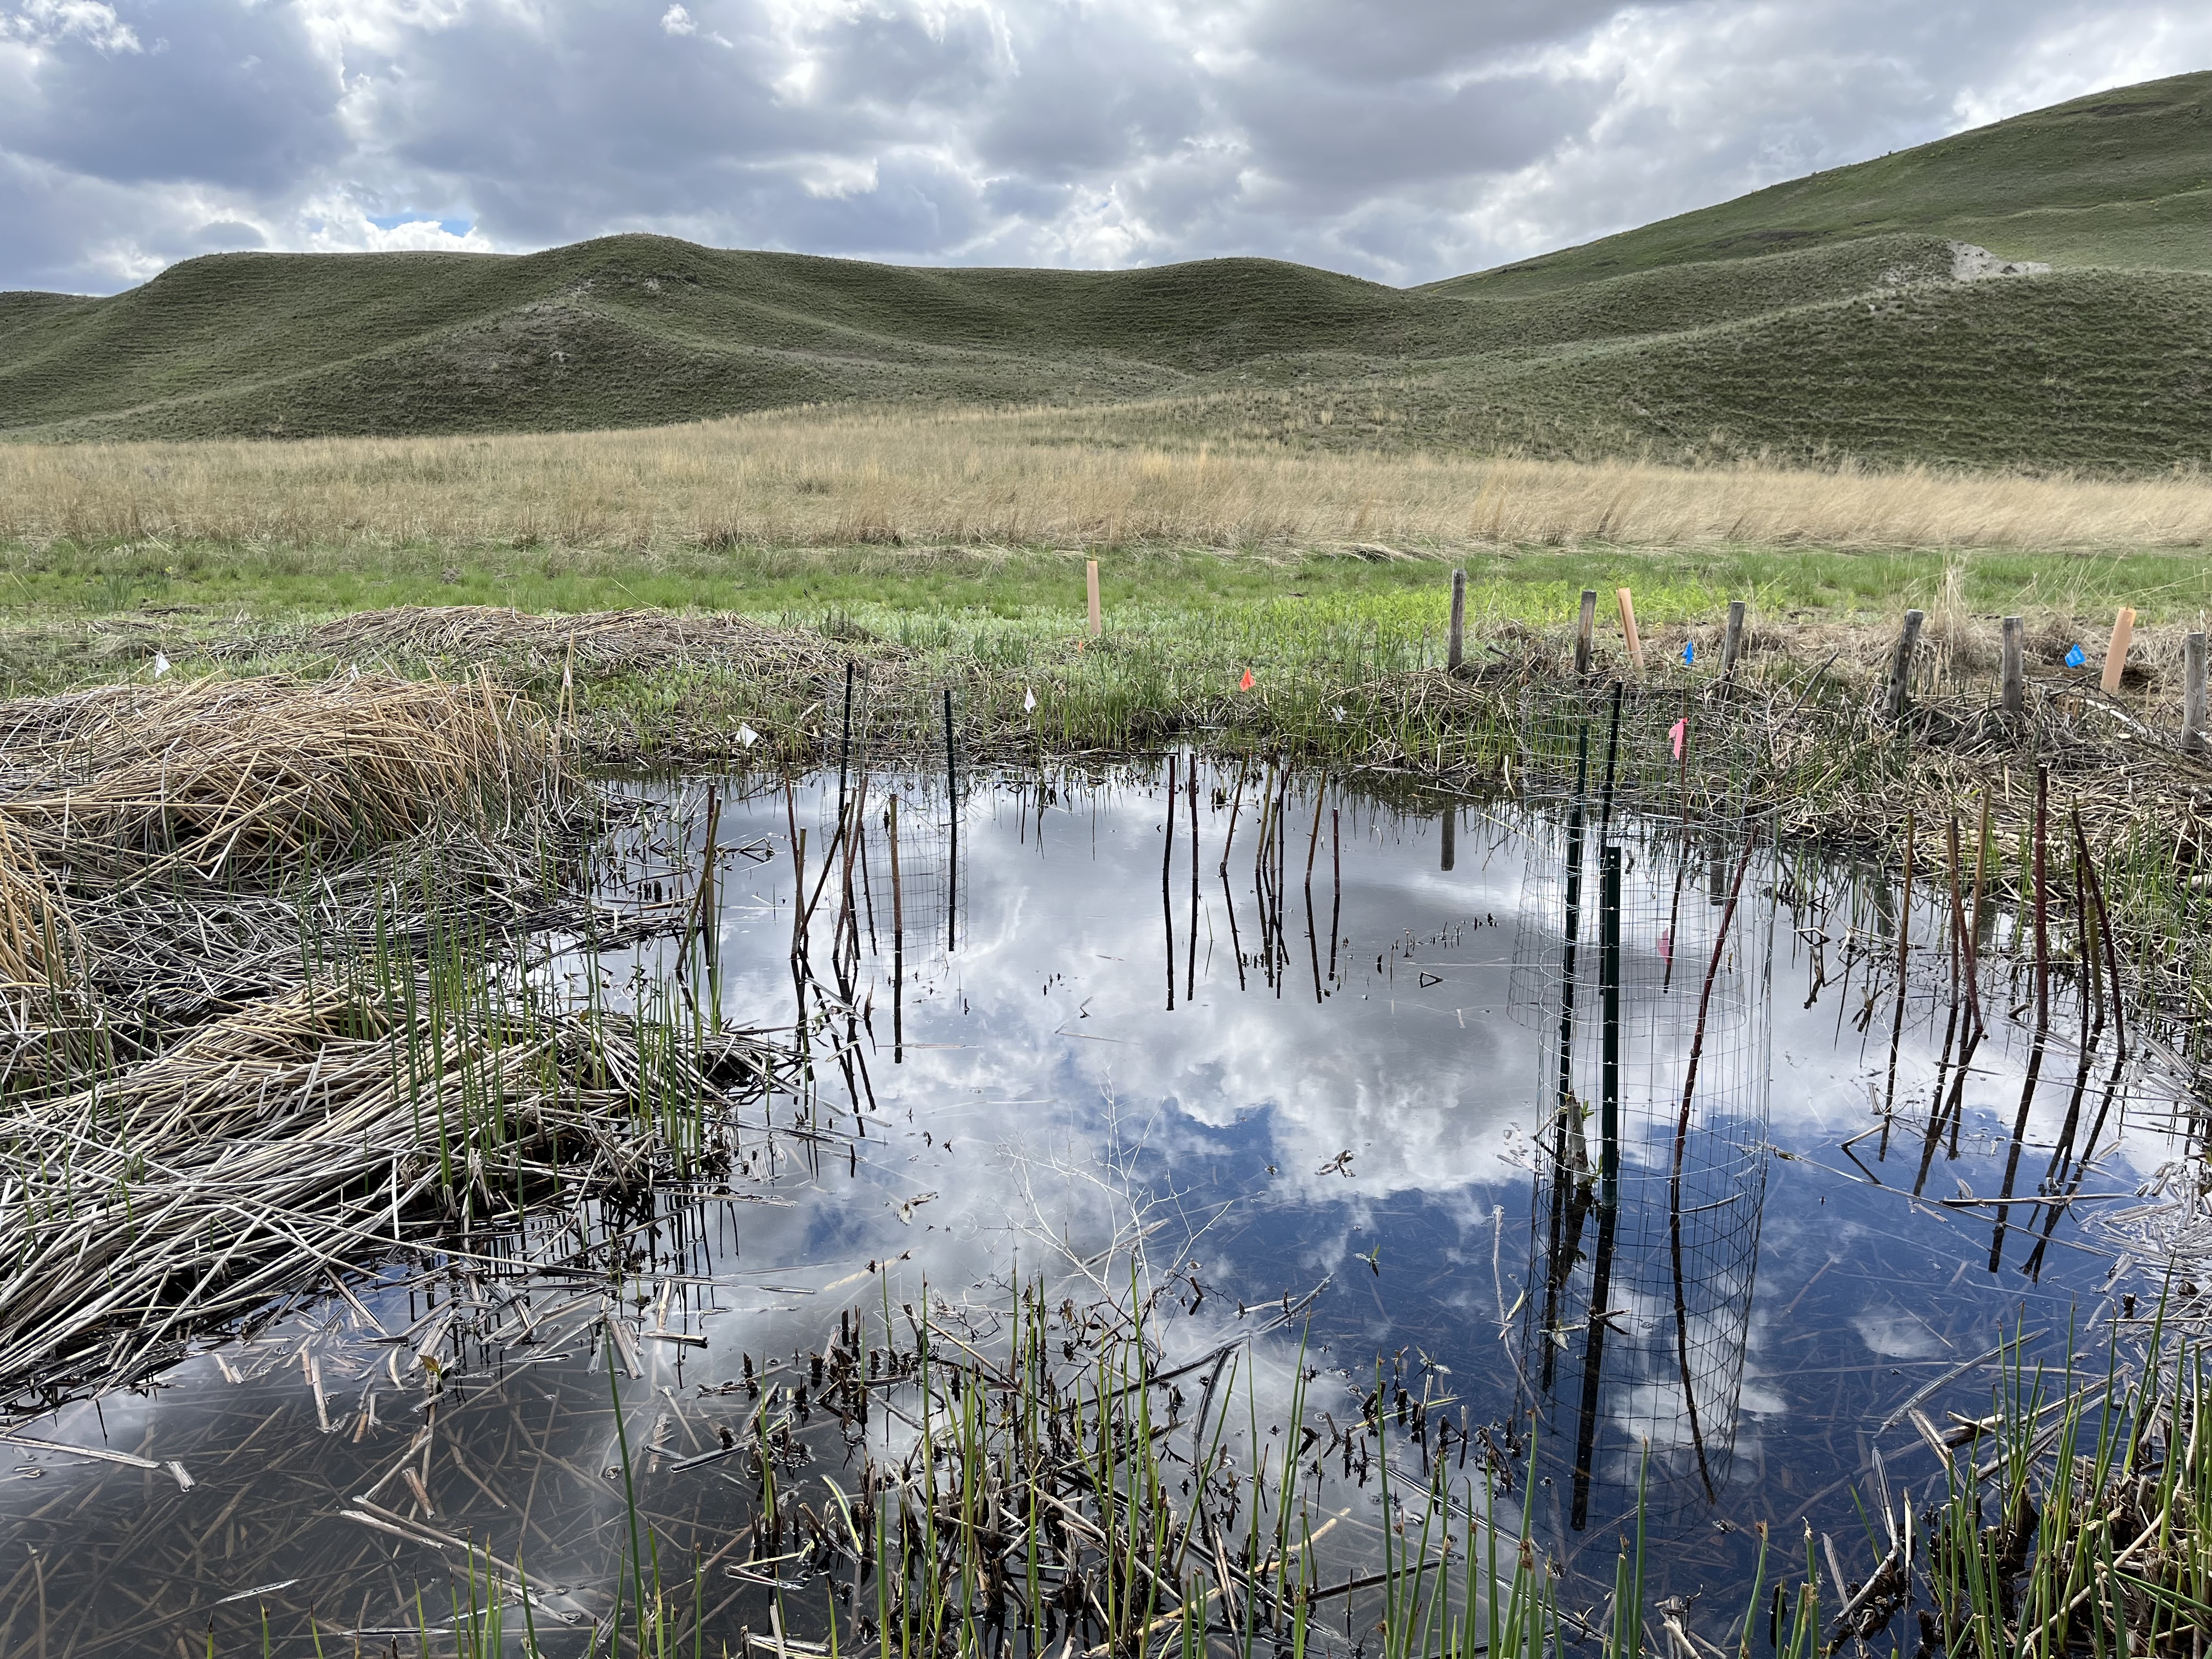 Small trees grow in a still pond. Green grasses and hills stand in the background, and the pond reflects a cloudy sky.